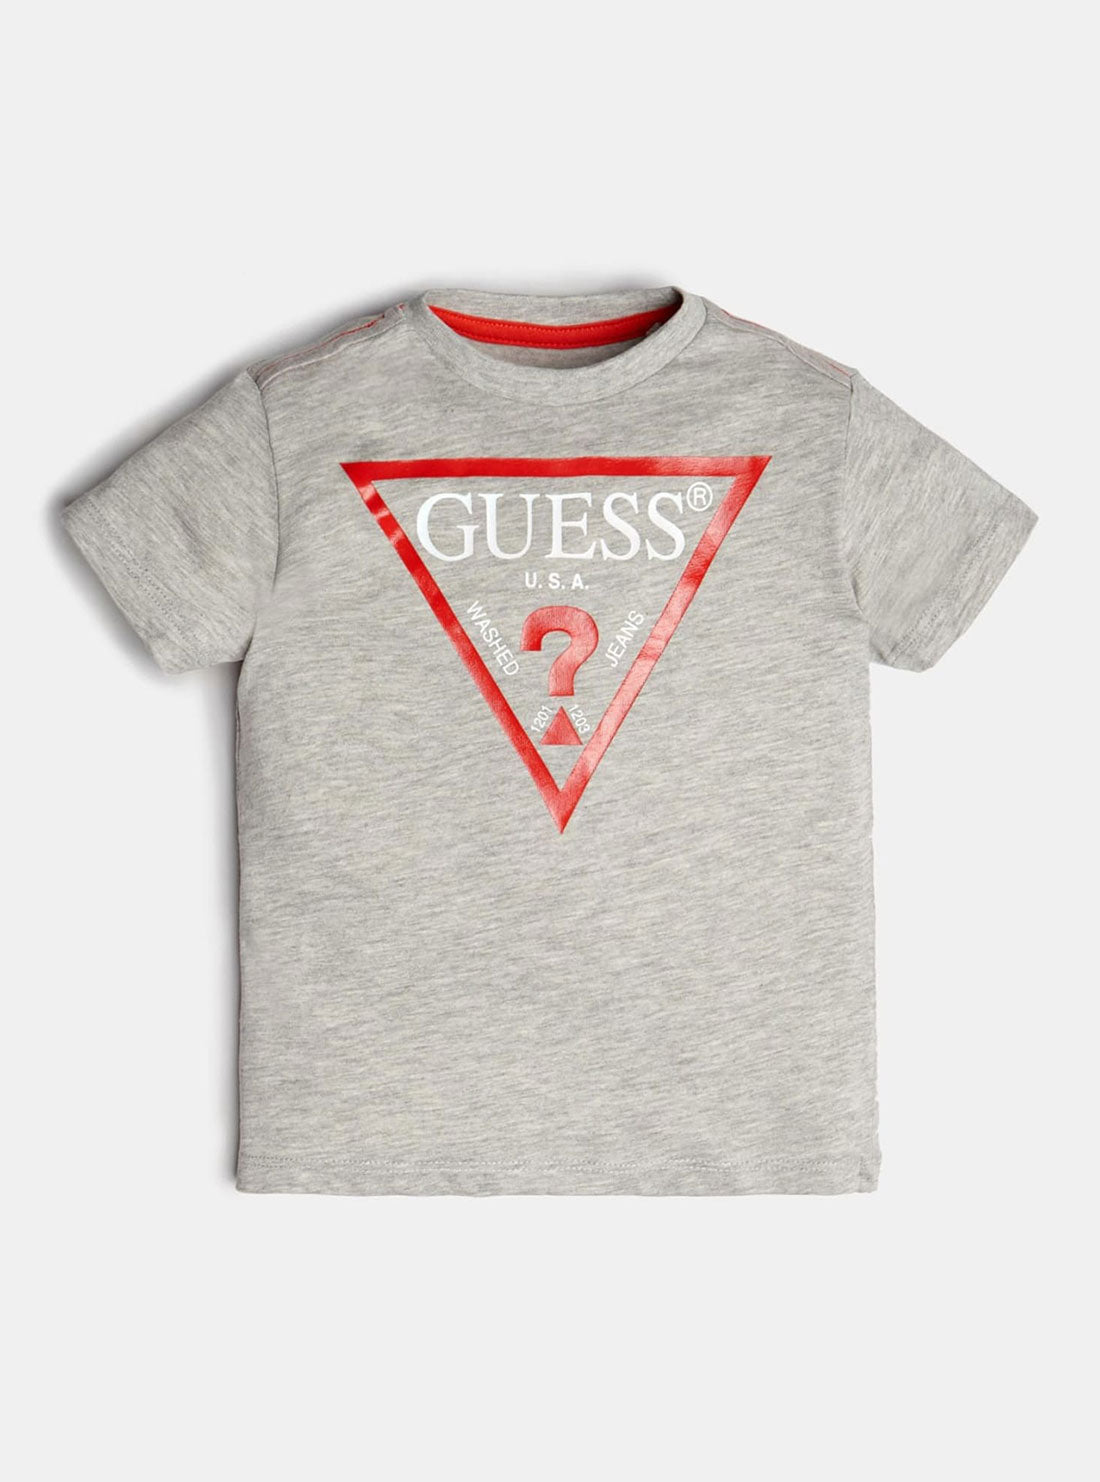 GUESS Short Sleeve Triangle Logo Grey Little Boy Tee Front View